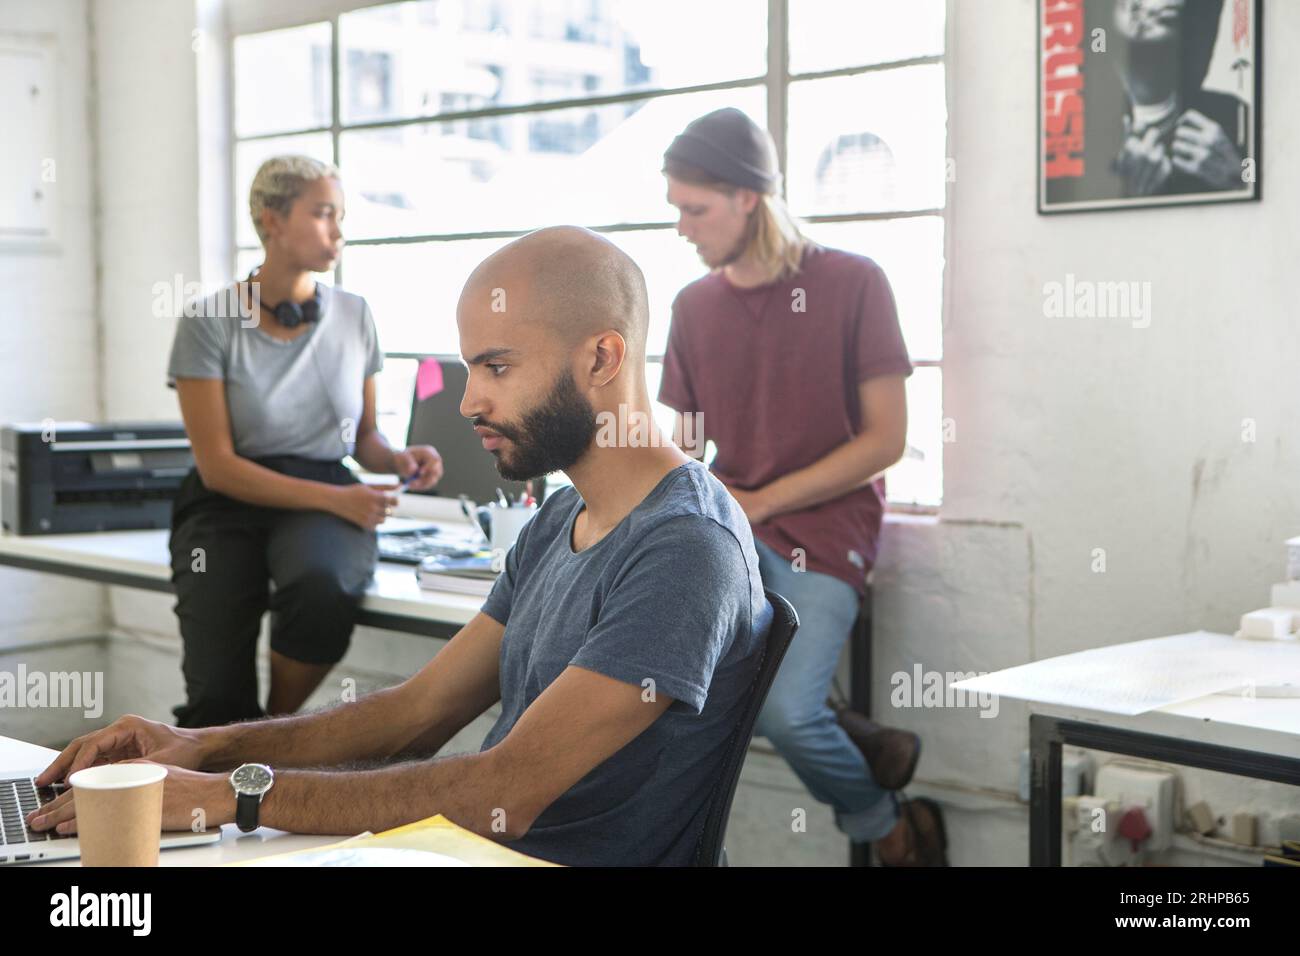 Young people in work situation Stock Photo